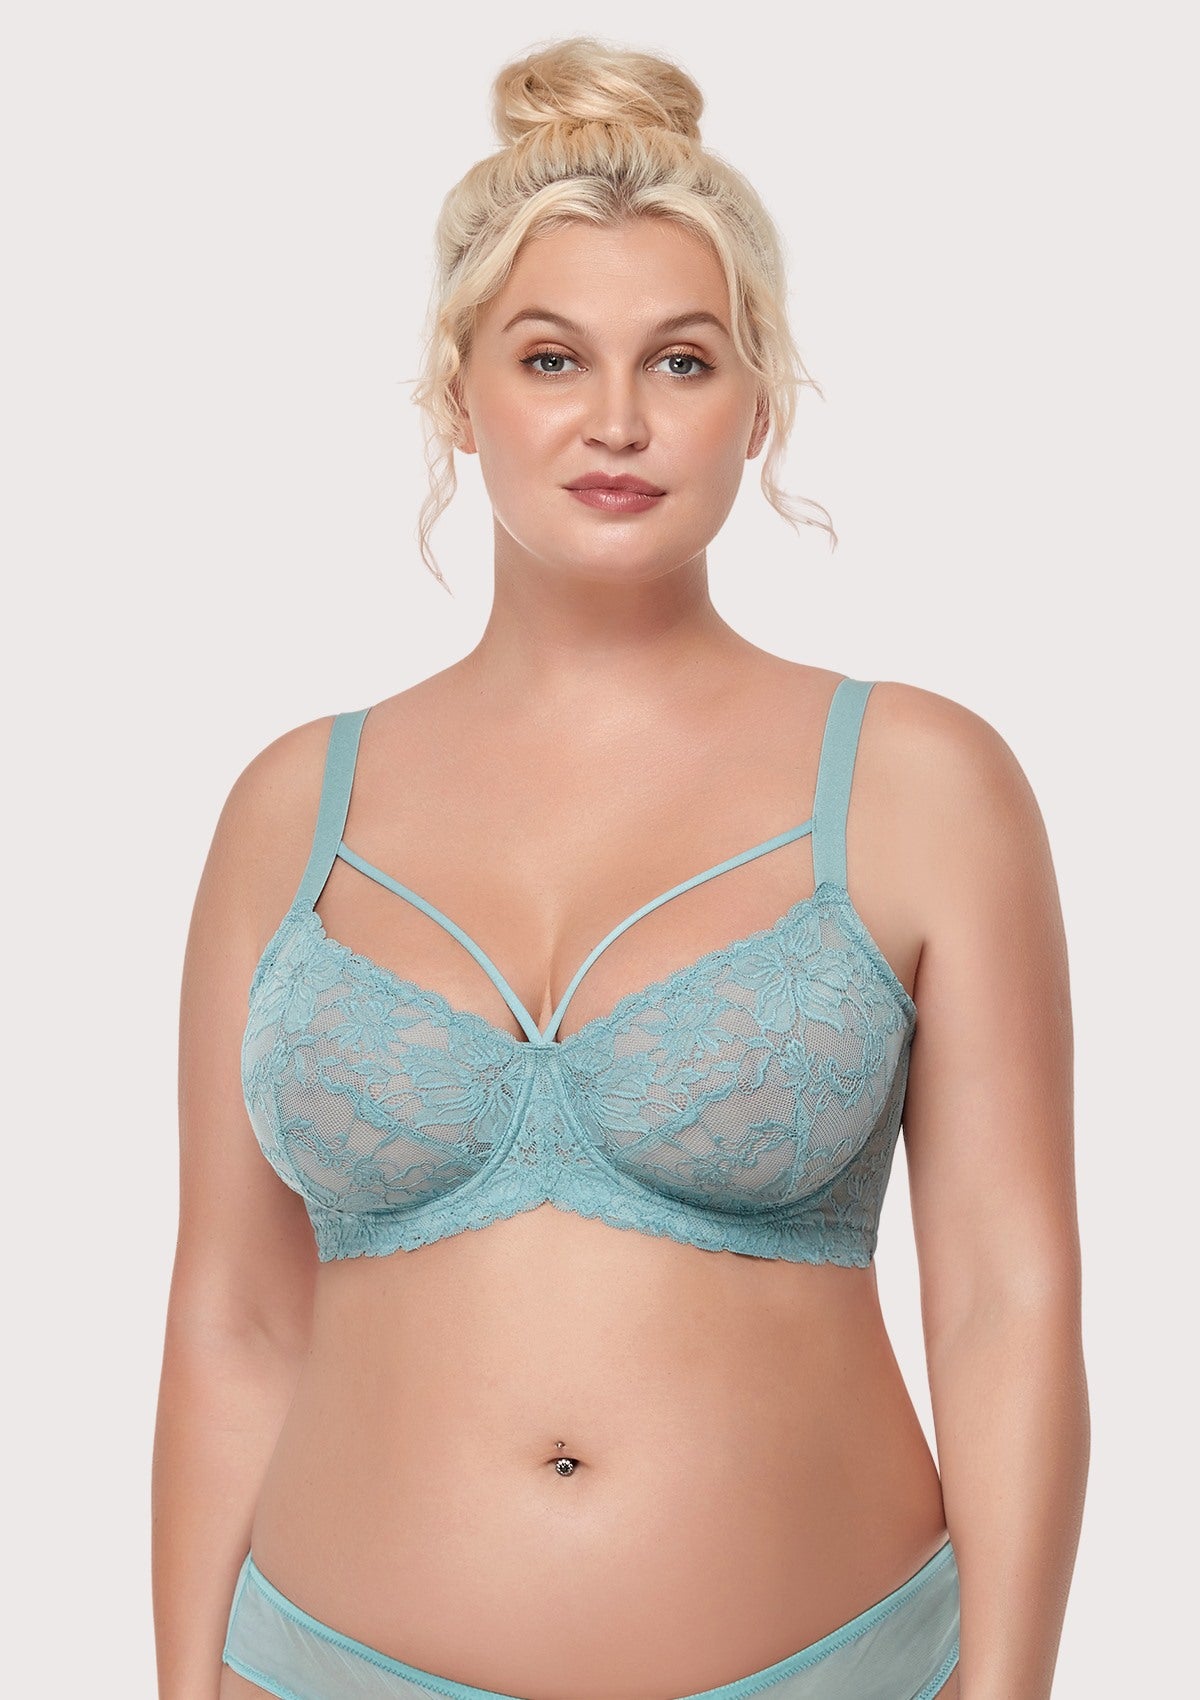 HSIA Pretty In Petals Unlined Lace Bra: Comfortable And Supportive Bra - Pewter Blue / 40 / C